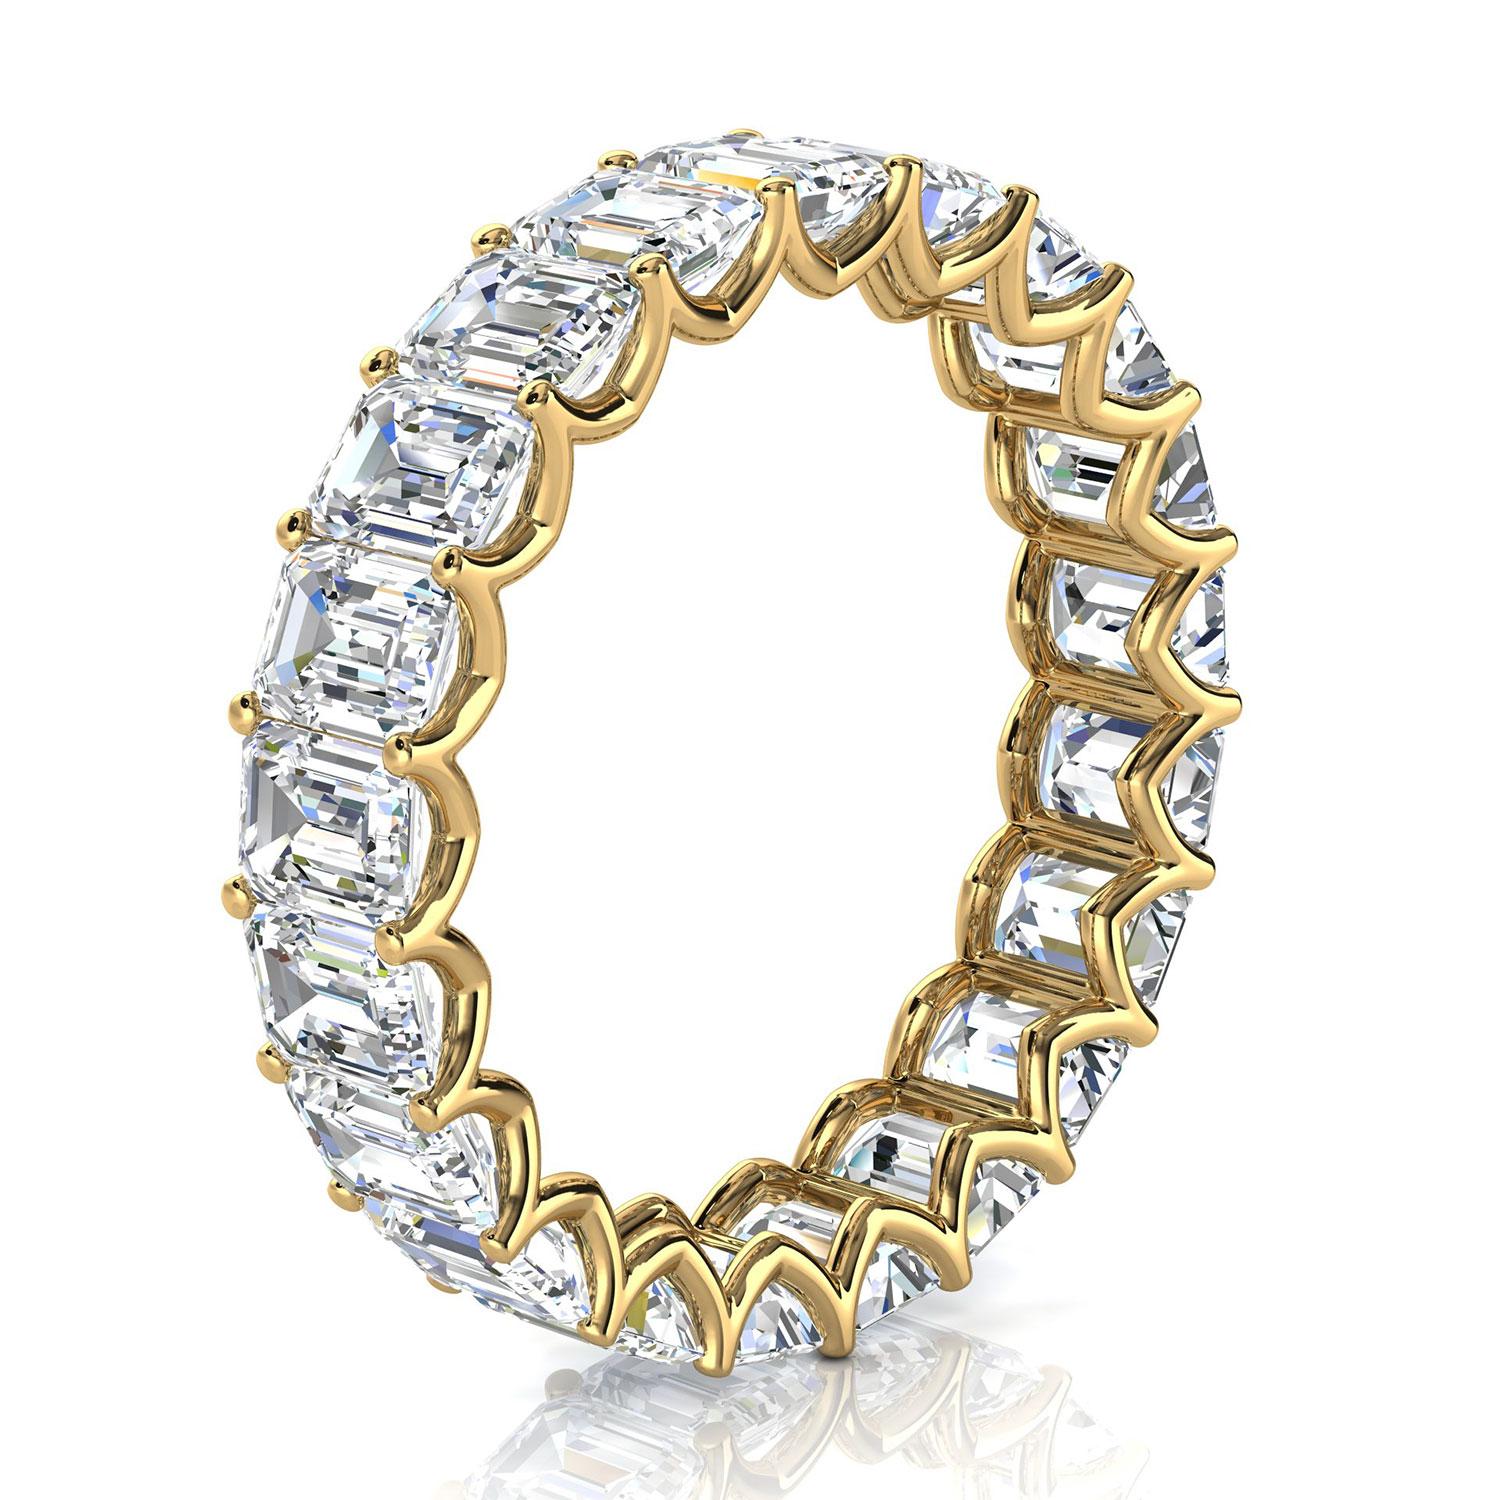 This Elegant Eternity Ring showcase matched 21 Emerald shape Natural Diamonds in an approximate total weight of 4. carat set in floating 